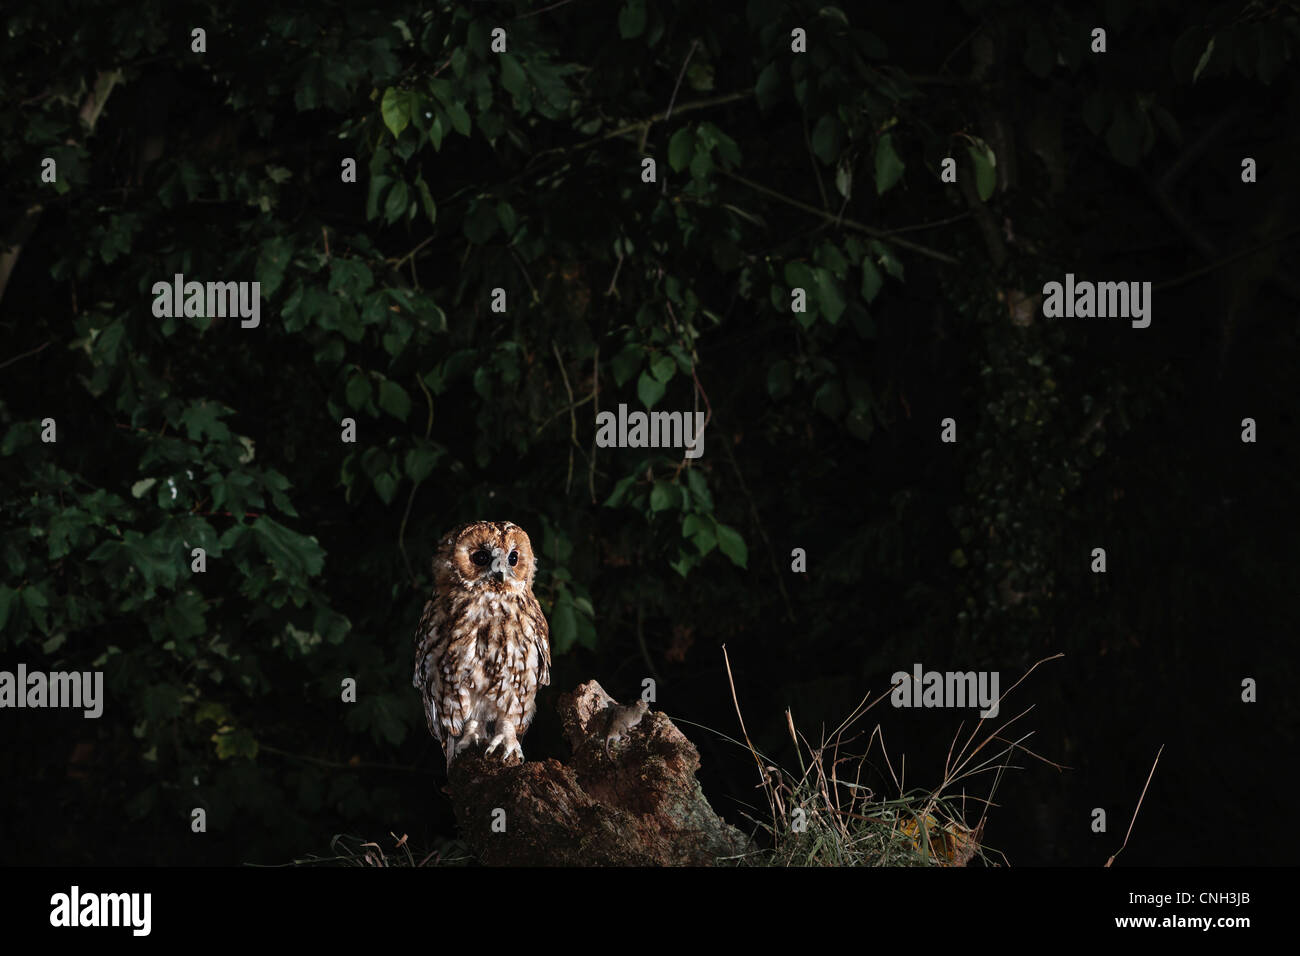 A wild and fstrixree tawny owl posing on old tree stump at night. Stock Photo